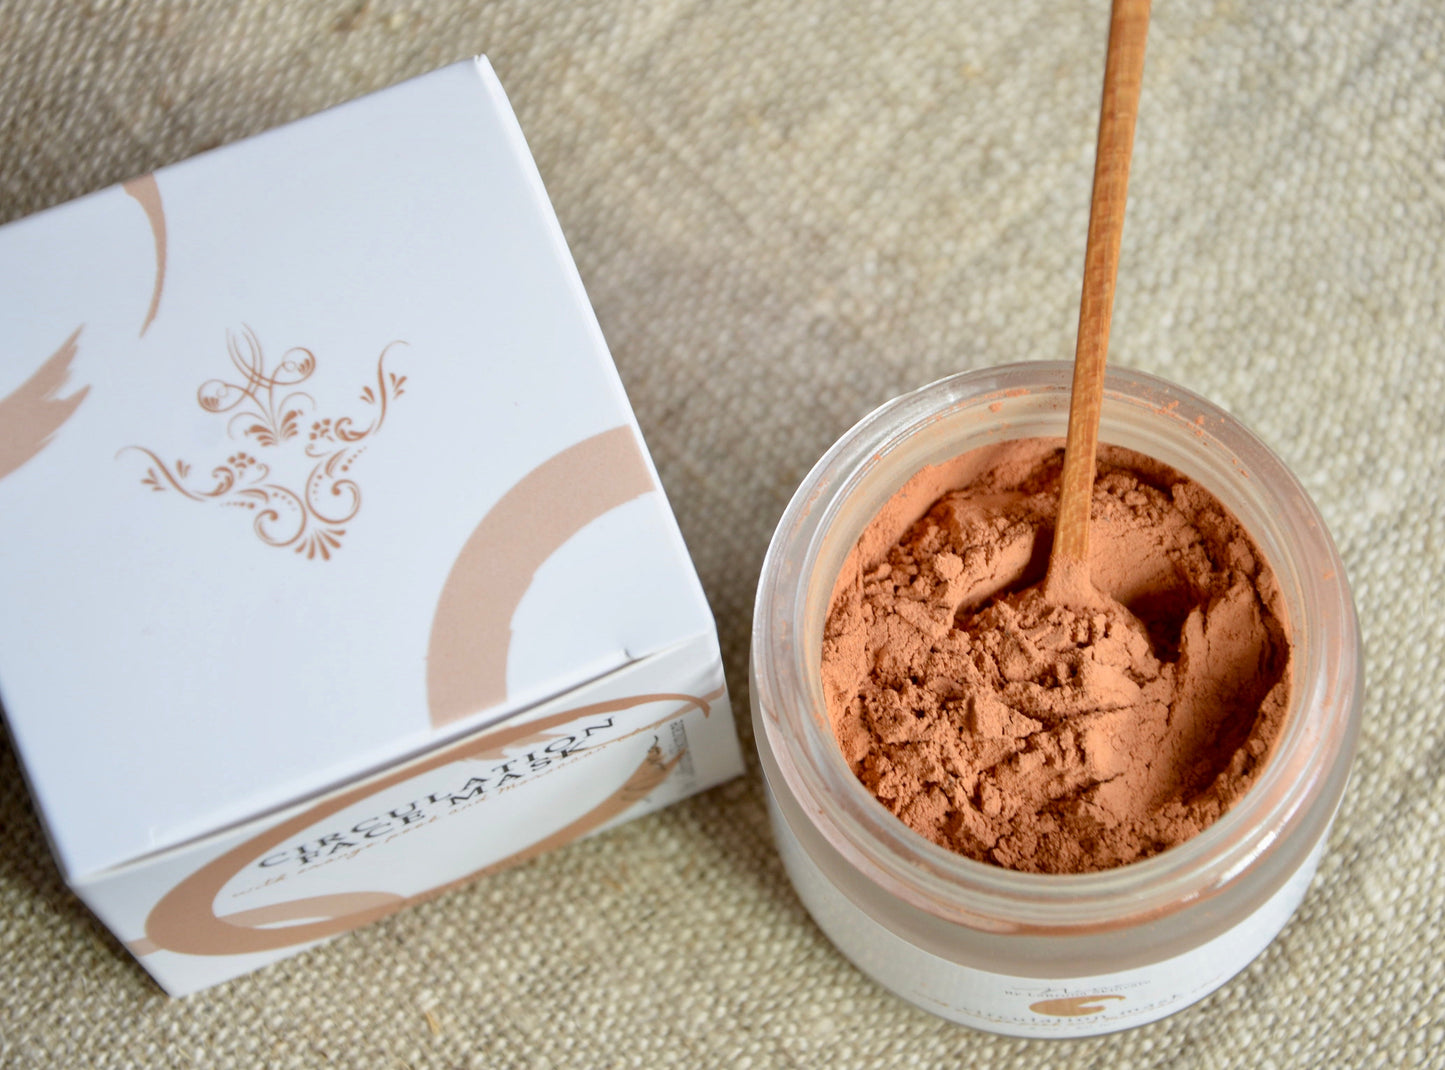 Circulation Mask with Orange Peel and Moroccan Clay by LaBruna Skincare